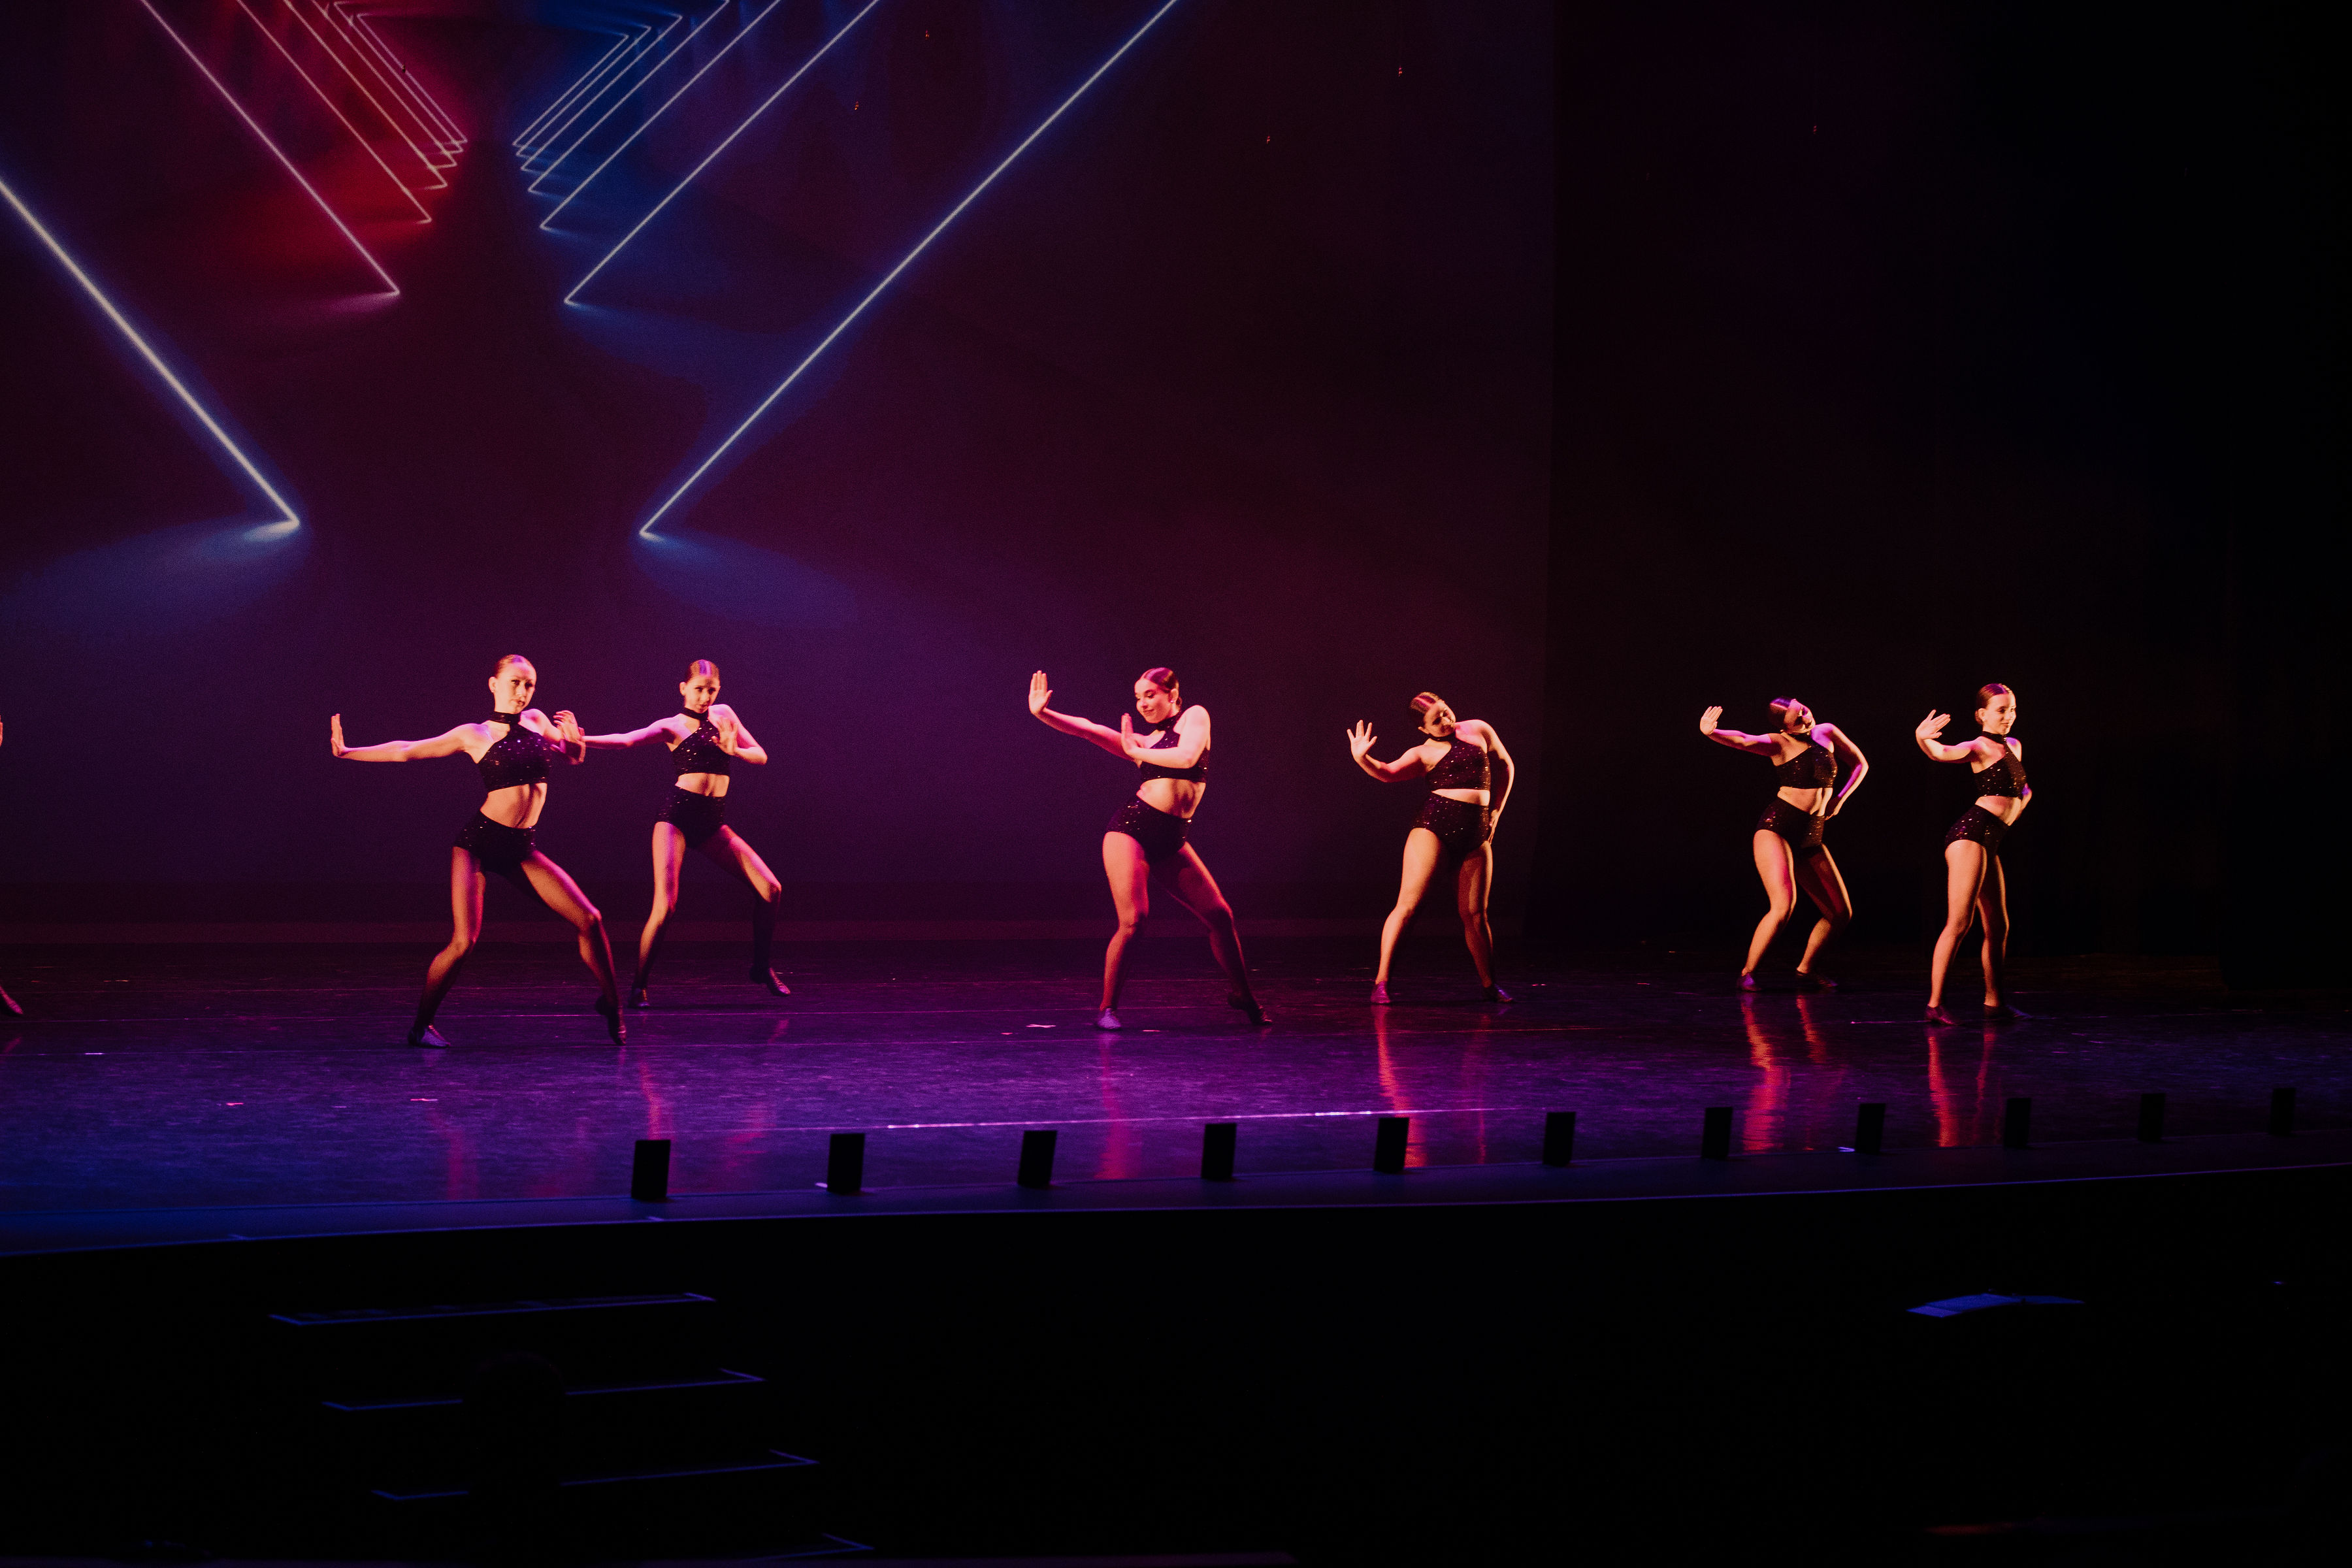 Six dancers performing jazz routine on stage